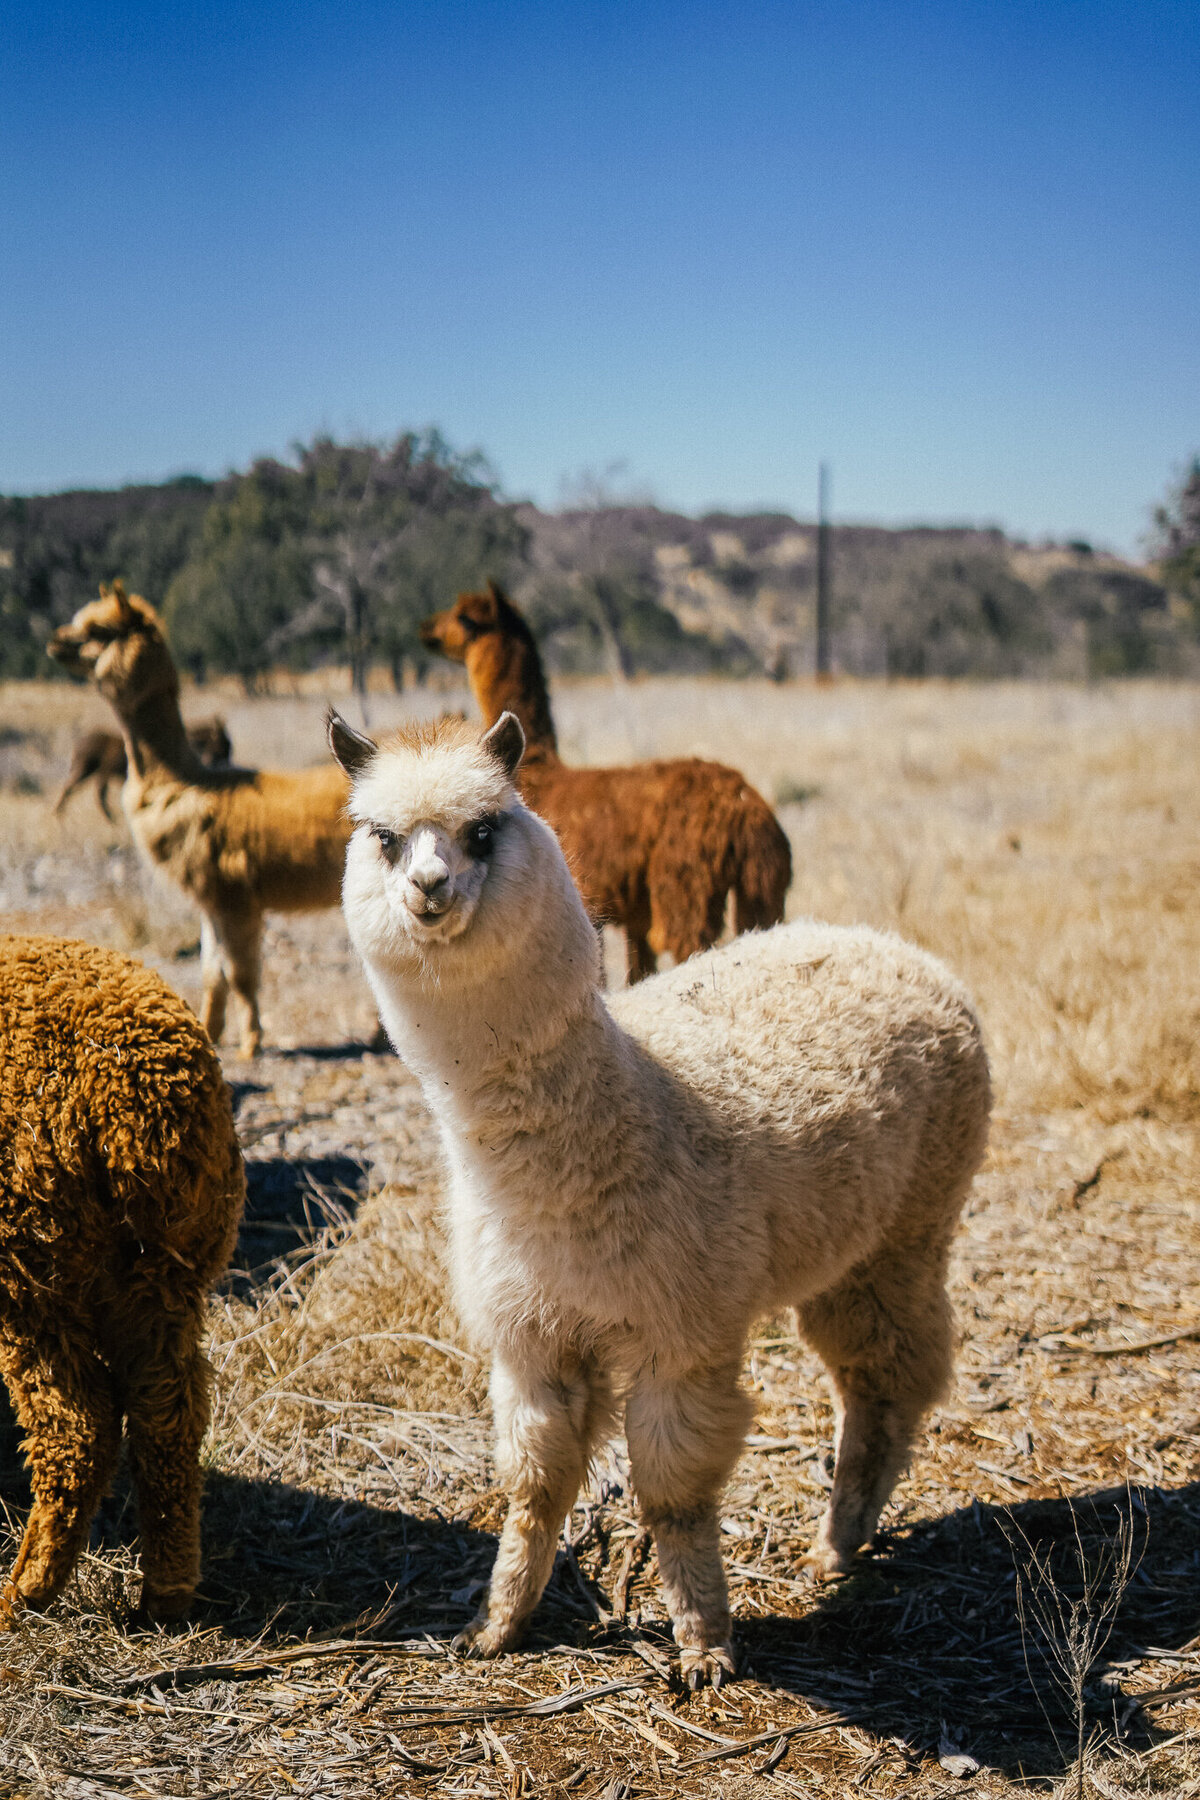 White alpaca standing with a group of brown alpacas